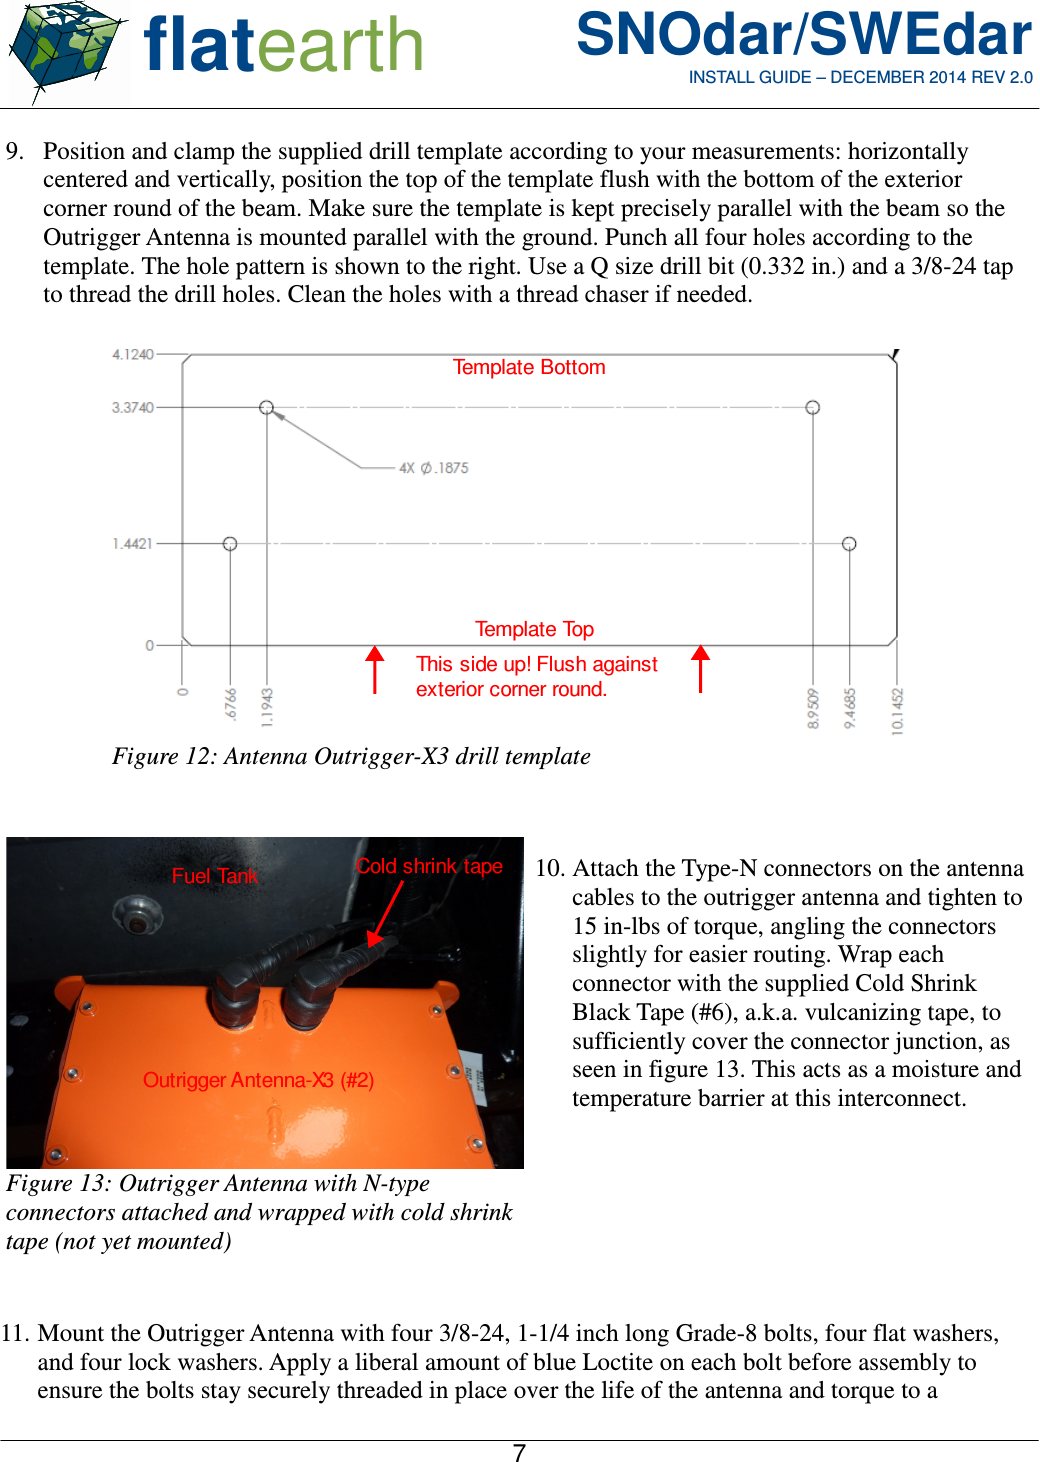  flatearth SNOdar/SWEdarINSTALL GUIDE – DECEMBER 2014 REV 2.09. Position and clamp the supplied drill template according to your measurements: horizontallycentered and vertically, position the top of the template flush with the bottom of the exteriorcorner round of the beam. Make sure the template is kept precisely parallel with the beam so theOutrigger Antenna is mounted parallel with the ground. Punch all four holes according to thetemplate. The hole pattern is shown to the right. Use a Q size drill bit (0.332 in.) and a 3/8-24 tapto thread the drill holes. Clean the holes with a thread chaser if needed.10. Attach the Type-N connectors on the antennacables to the outrigger antenna and tighten to15 in-lbs of torque, angling the connectorsslightly for easier routing. Wrap eachconnector with the supplied Cold ShrinkBlack Tape (#6), a.k.a. vulcanizing tape, tosufficiently cover the connector junction, asseen in figure 13. This acts as a moisture andtemperature barrier at this interconnect.11. Mount the Outrigger Antenna with four 3/8-24, 1-1/4 inch long Grade-8 bolts, four flat washers,and four lock washers. Apply a liberal amount of blue Loctite on each bolt before assembly toensure the bolts stay securely threaded in place over the life of the antenna and torque to a7Figure 12: Antenna Outrigger-X3 drill templateTemplate TopTemplate BottomThis side up! Flush against exterior corner round.  Figure 13: Outrigger Antenna with N-typeconnectors attached and wrapped with cold shrinktape (not yet mounted)Cold shrink tapeOutrigger Antenna-X3 (#2)Fuel Tank